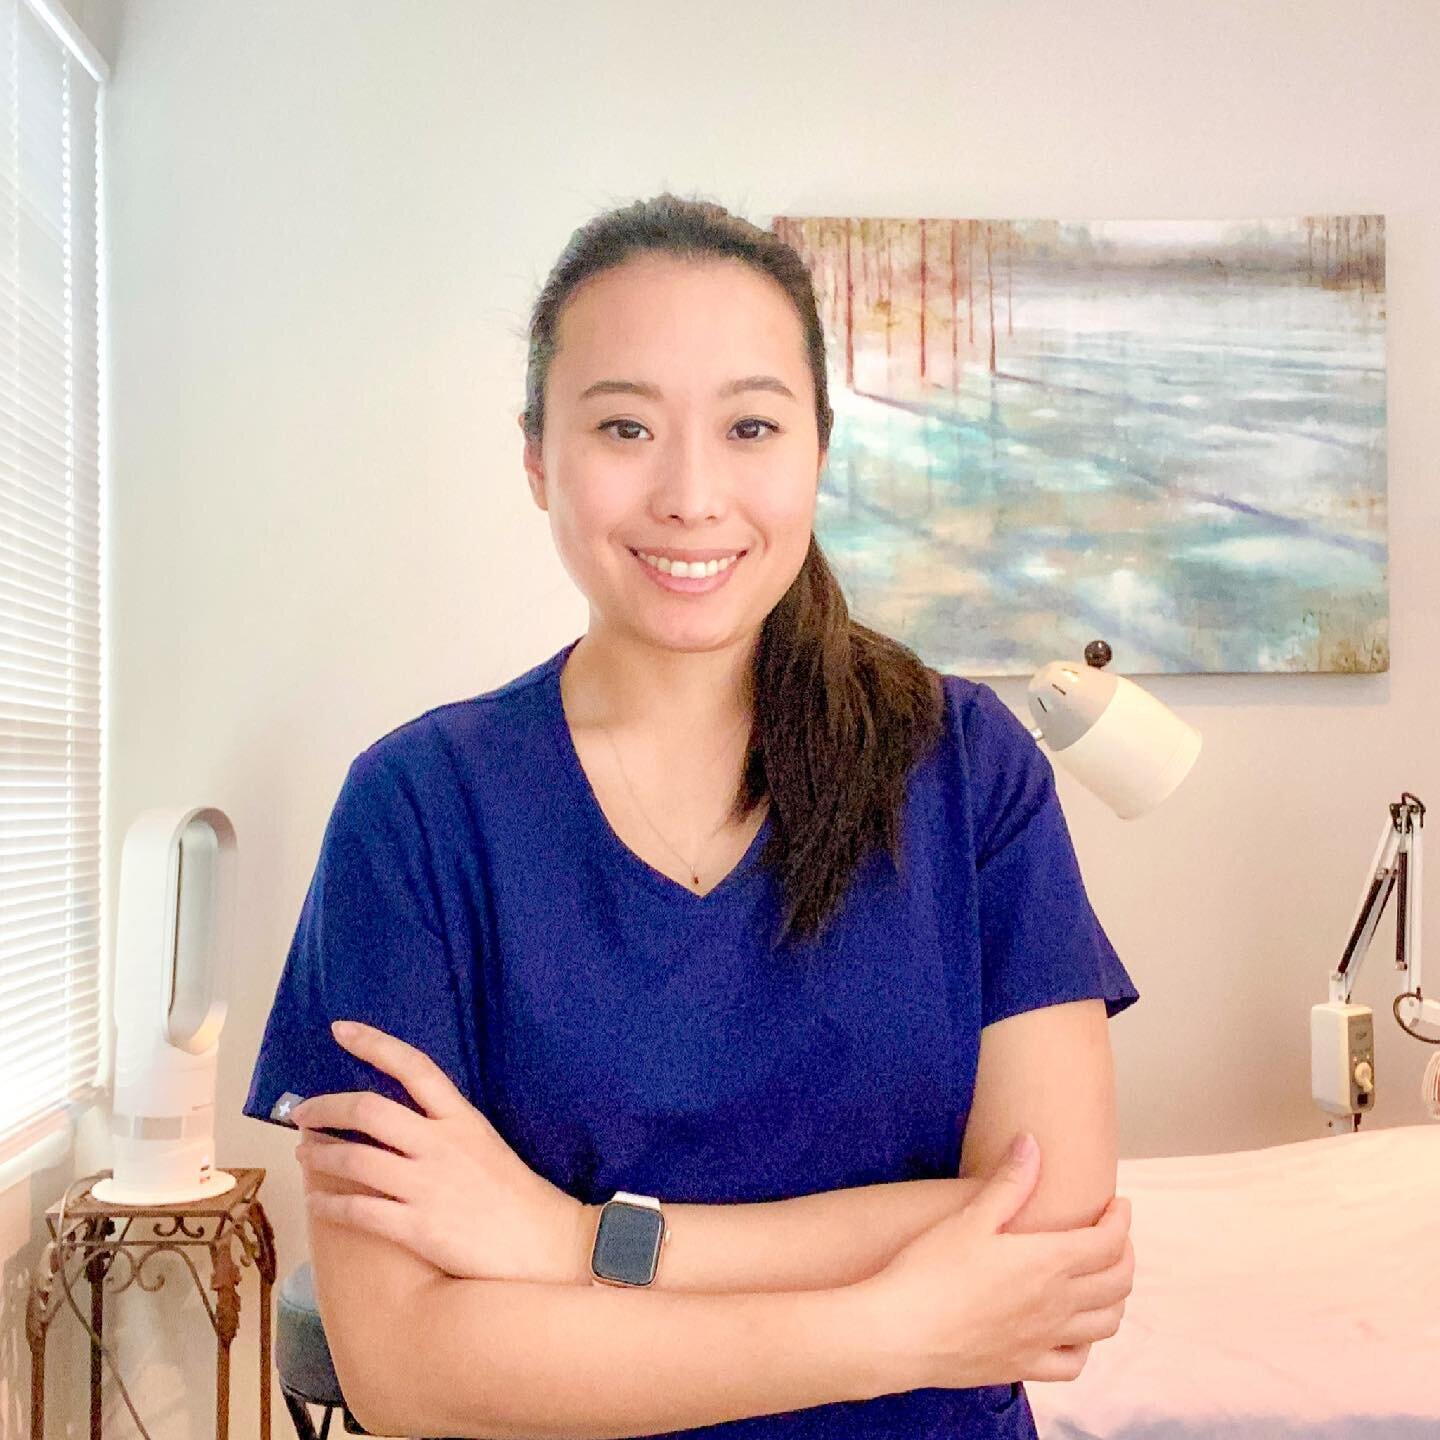 Putting the face to the name 🙋🏻&zwj;♀️ I&rsquo;m Dr. Ann Kim DACM, LAc. 

I&rsquo;m a California licensed acupuncturist, a 4th generation acupuncturist, and wife to an acupuncturist 😲 I can confidently say I&rsquo;m heavily influenced to apply min